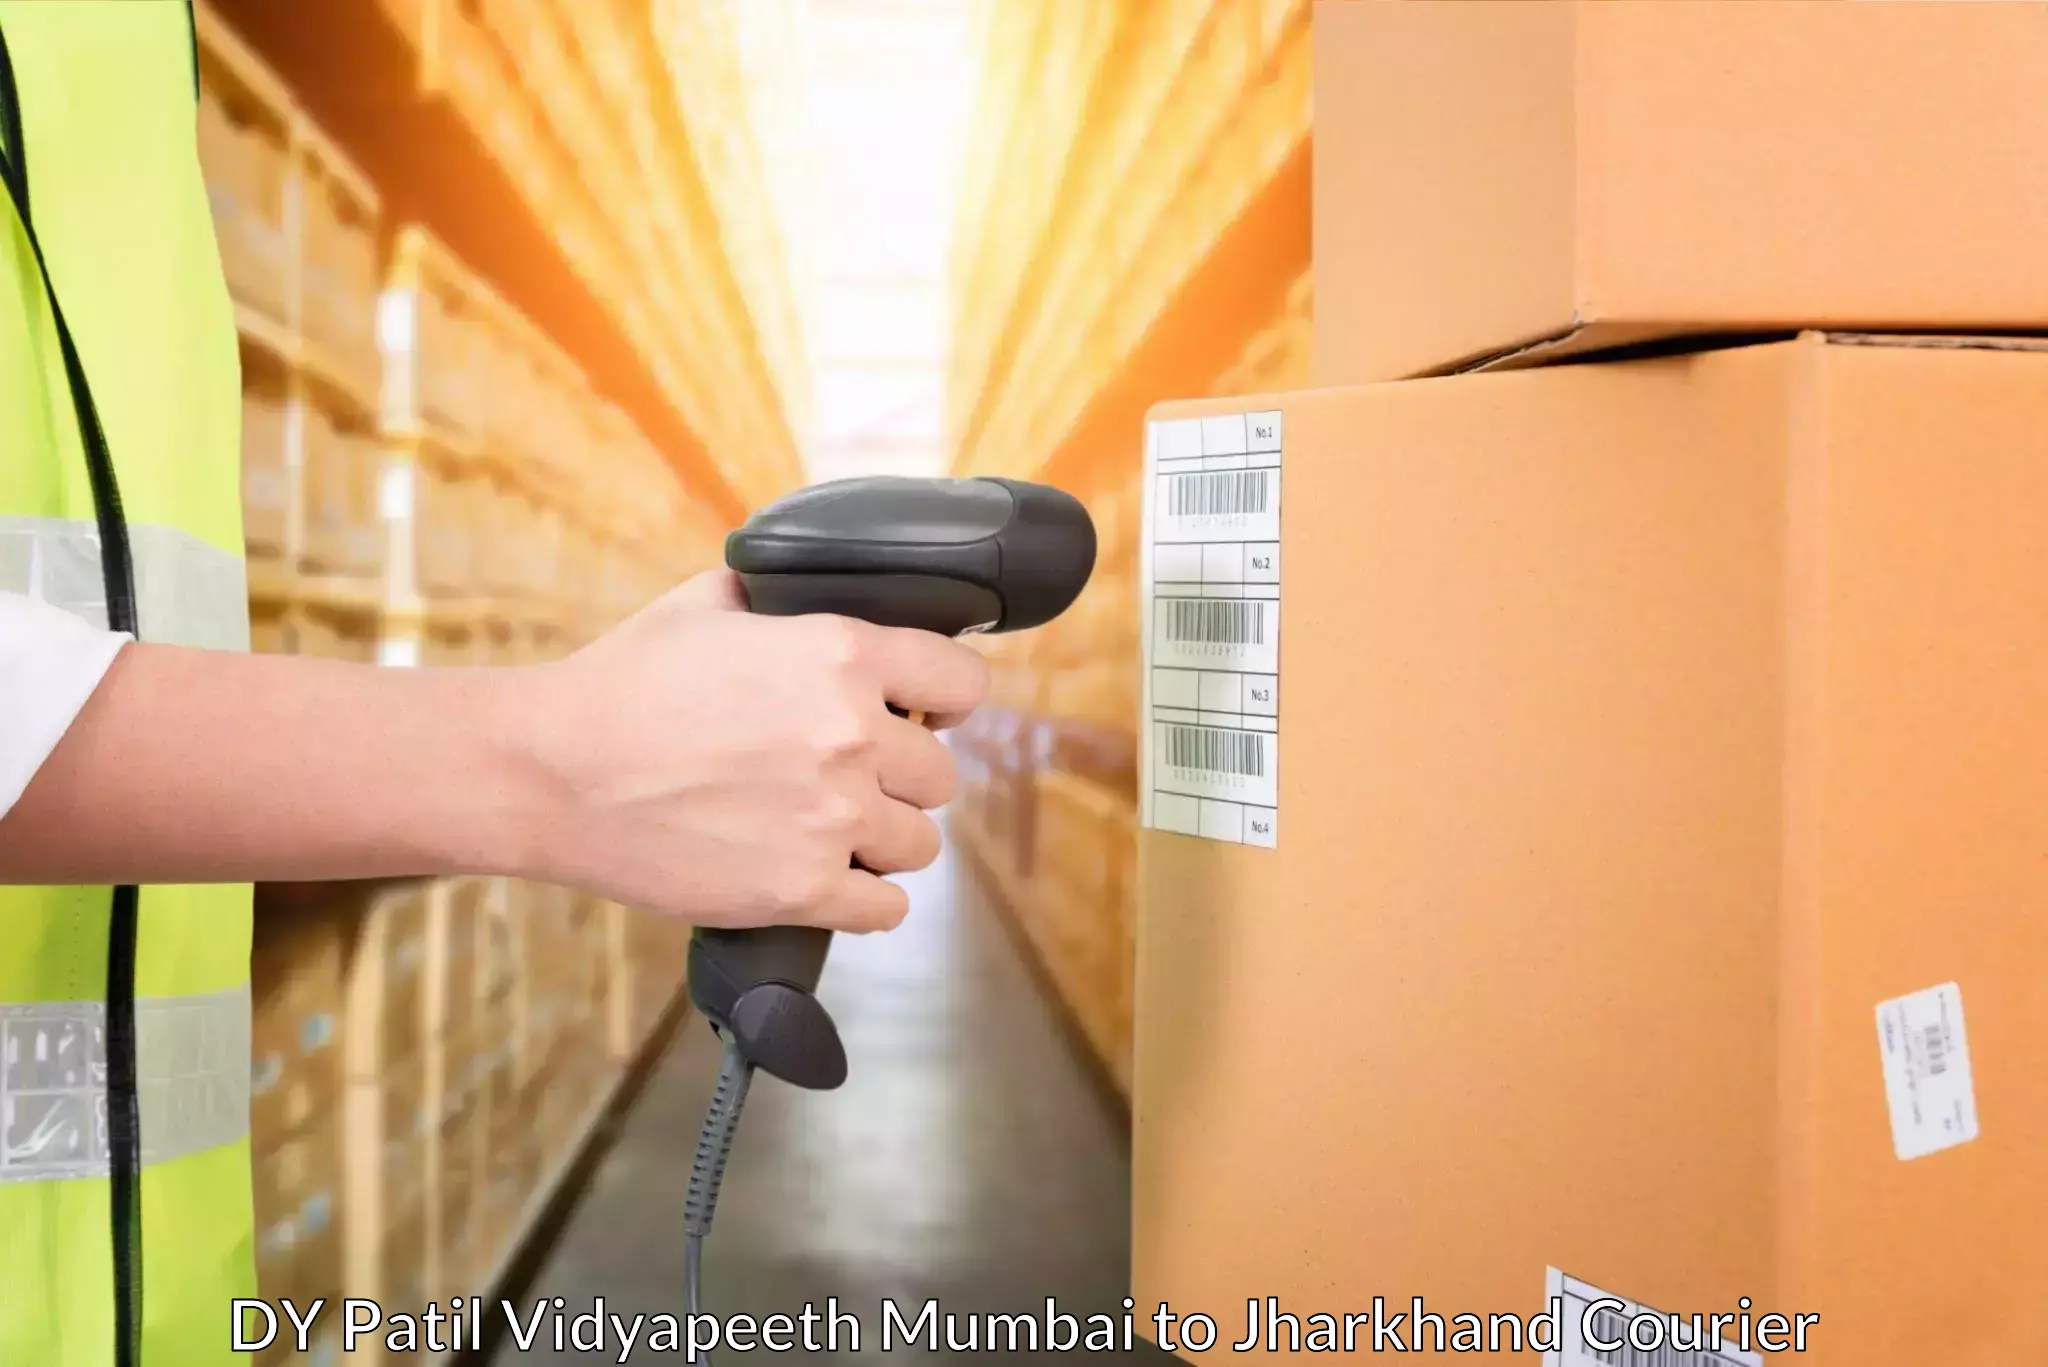 Full-service courier options in DY Patil Vidyapeeth Mumbai to Japla